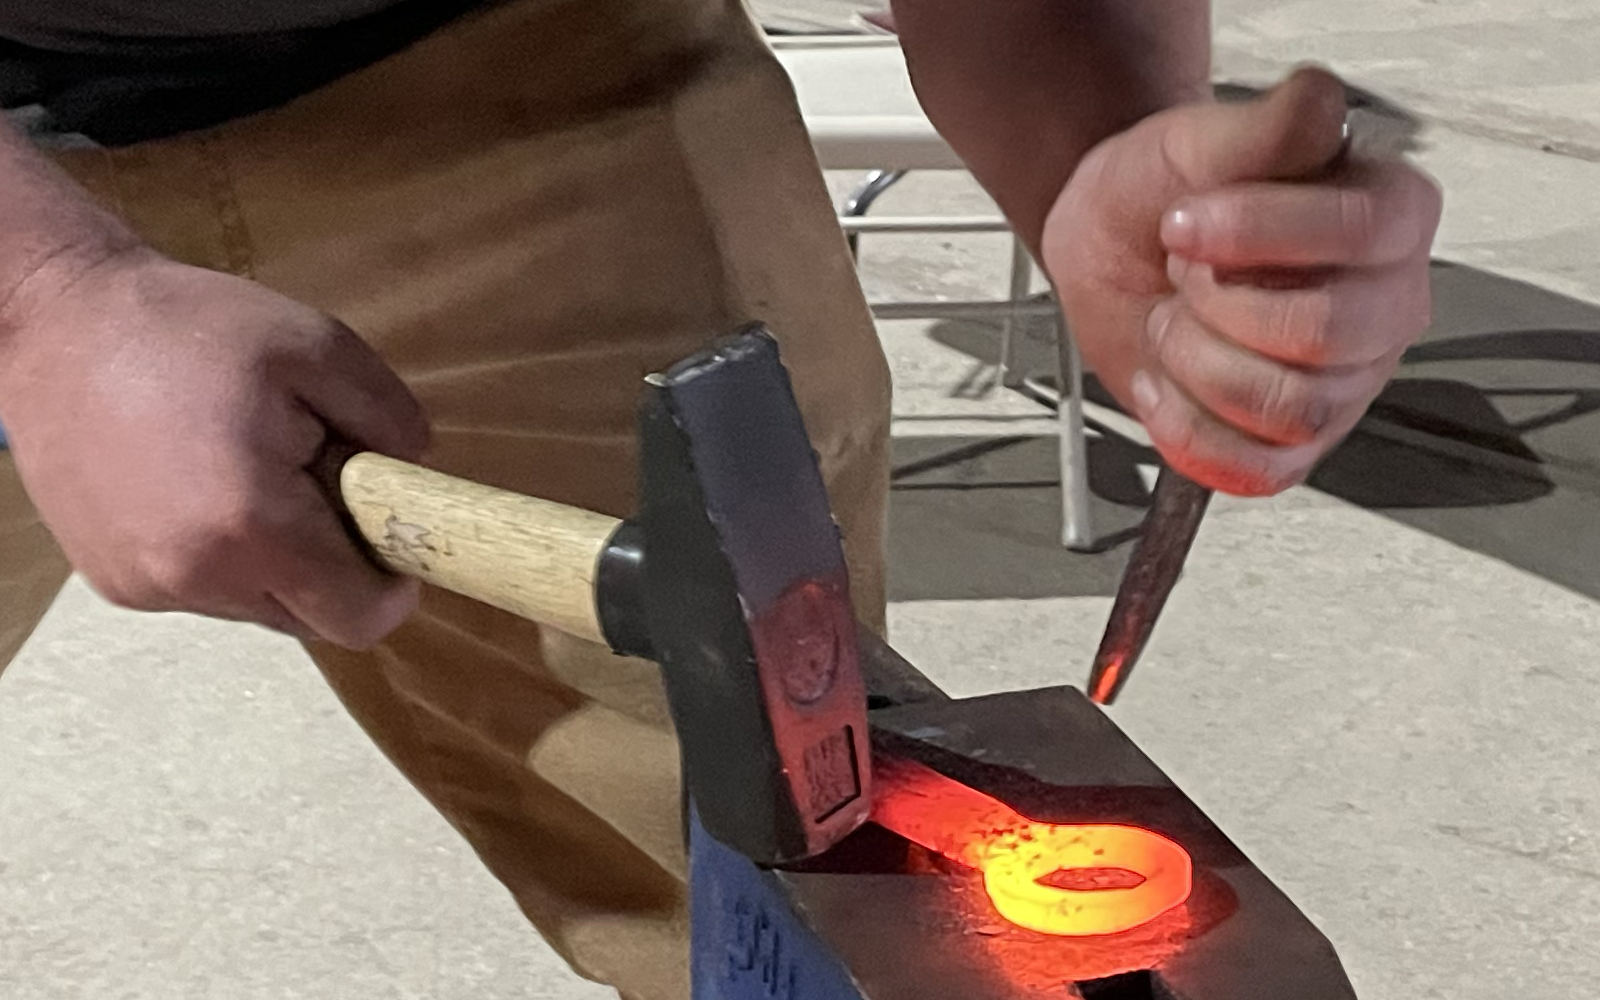 close up image showing the glowing hot bottle opener being worked by the teaching technician